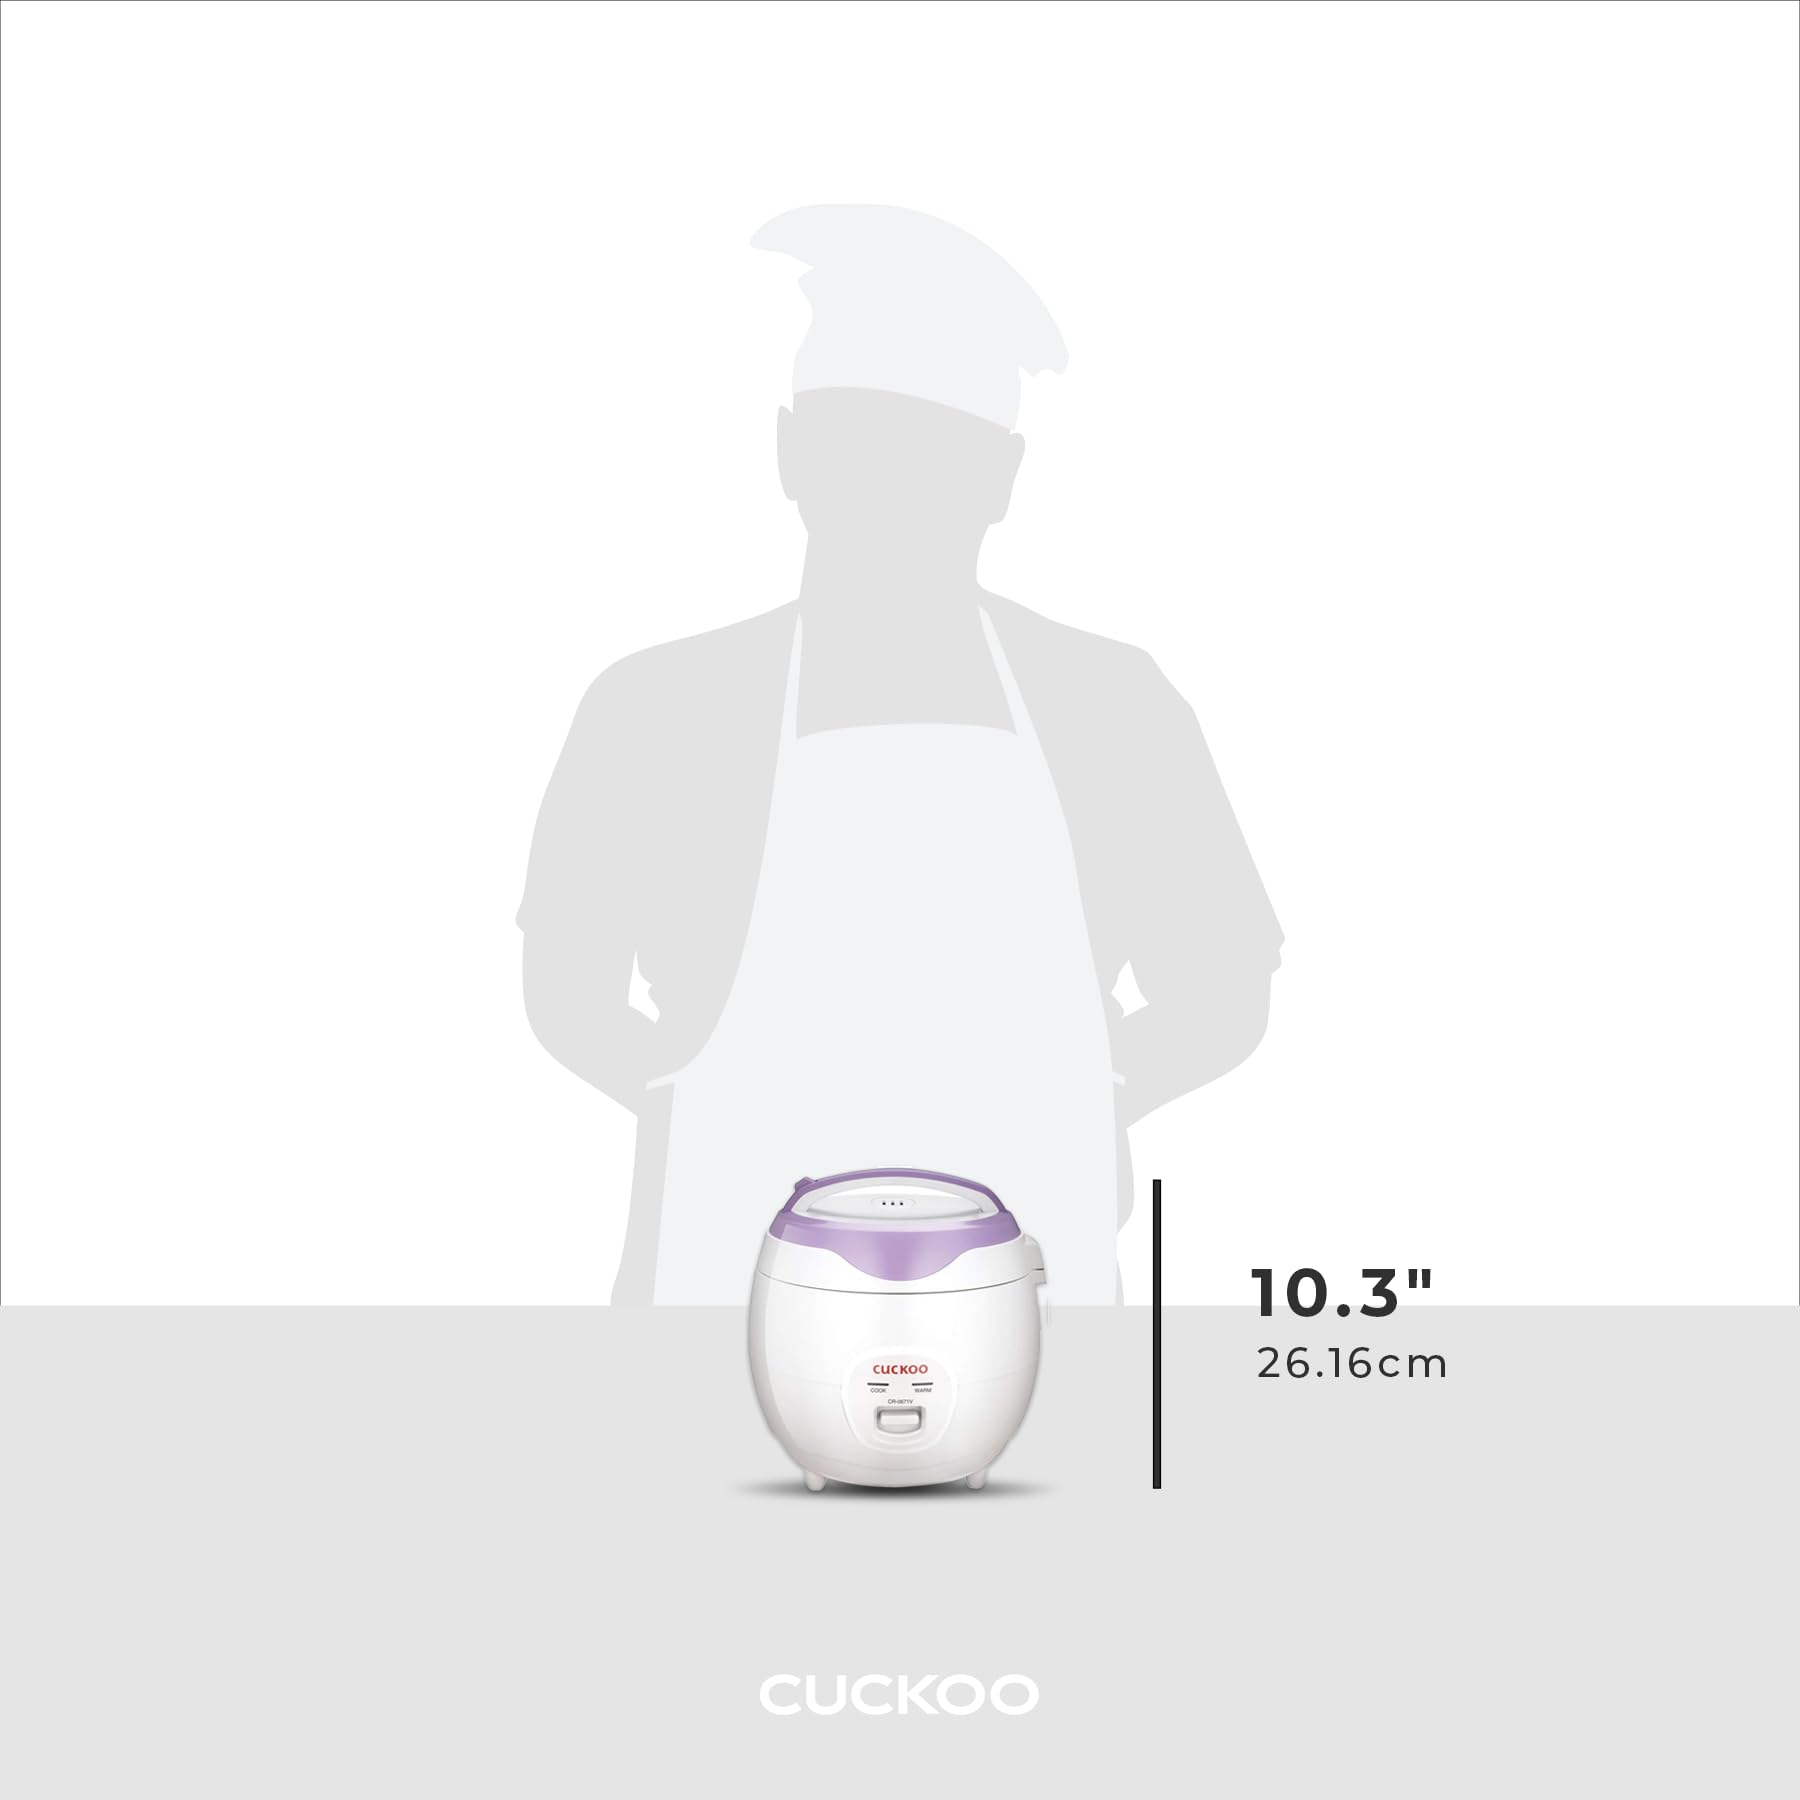 Cuckoo Electric Heating Rice Cooker CR-0671V (Violet/White)